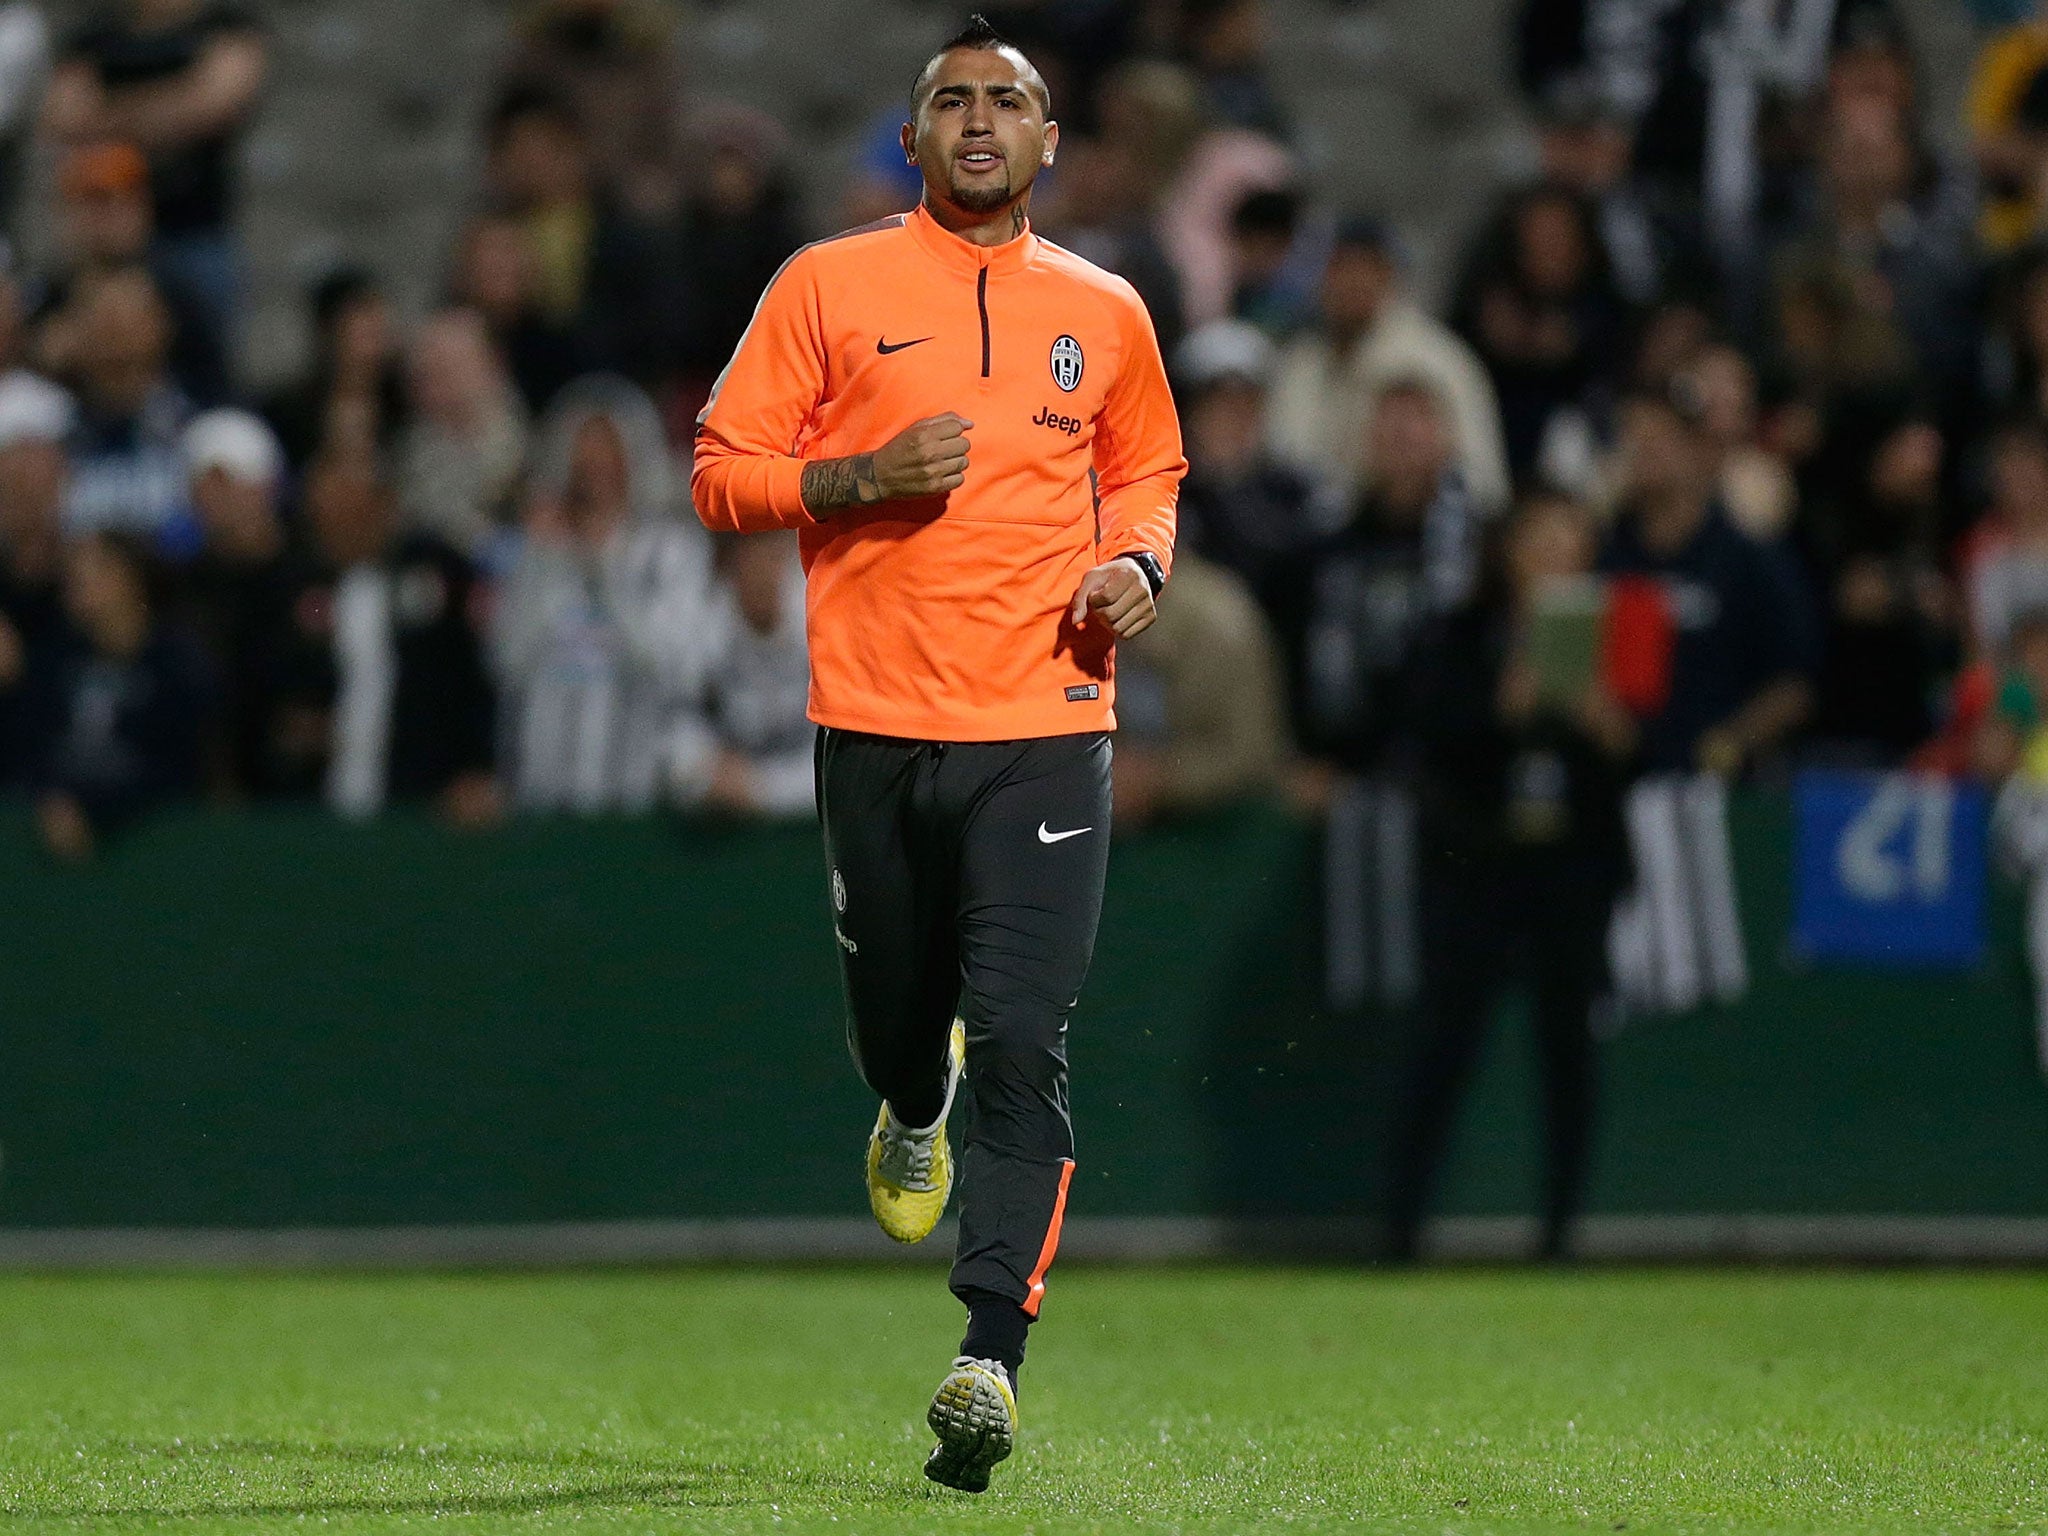 Arturo Vidal's agent is due to meet Louis van Gaal this week over a proposed move to Manchester United